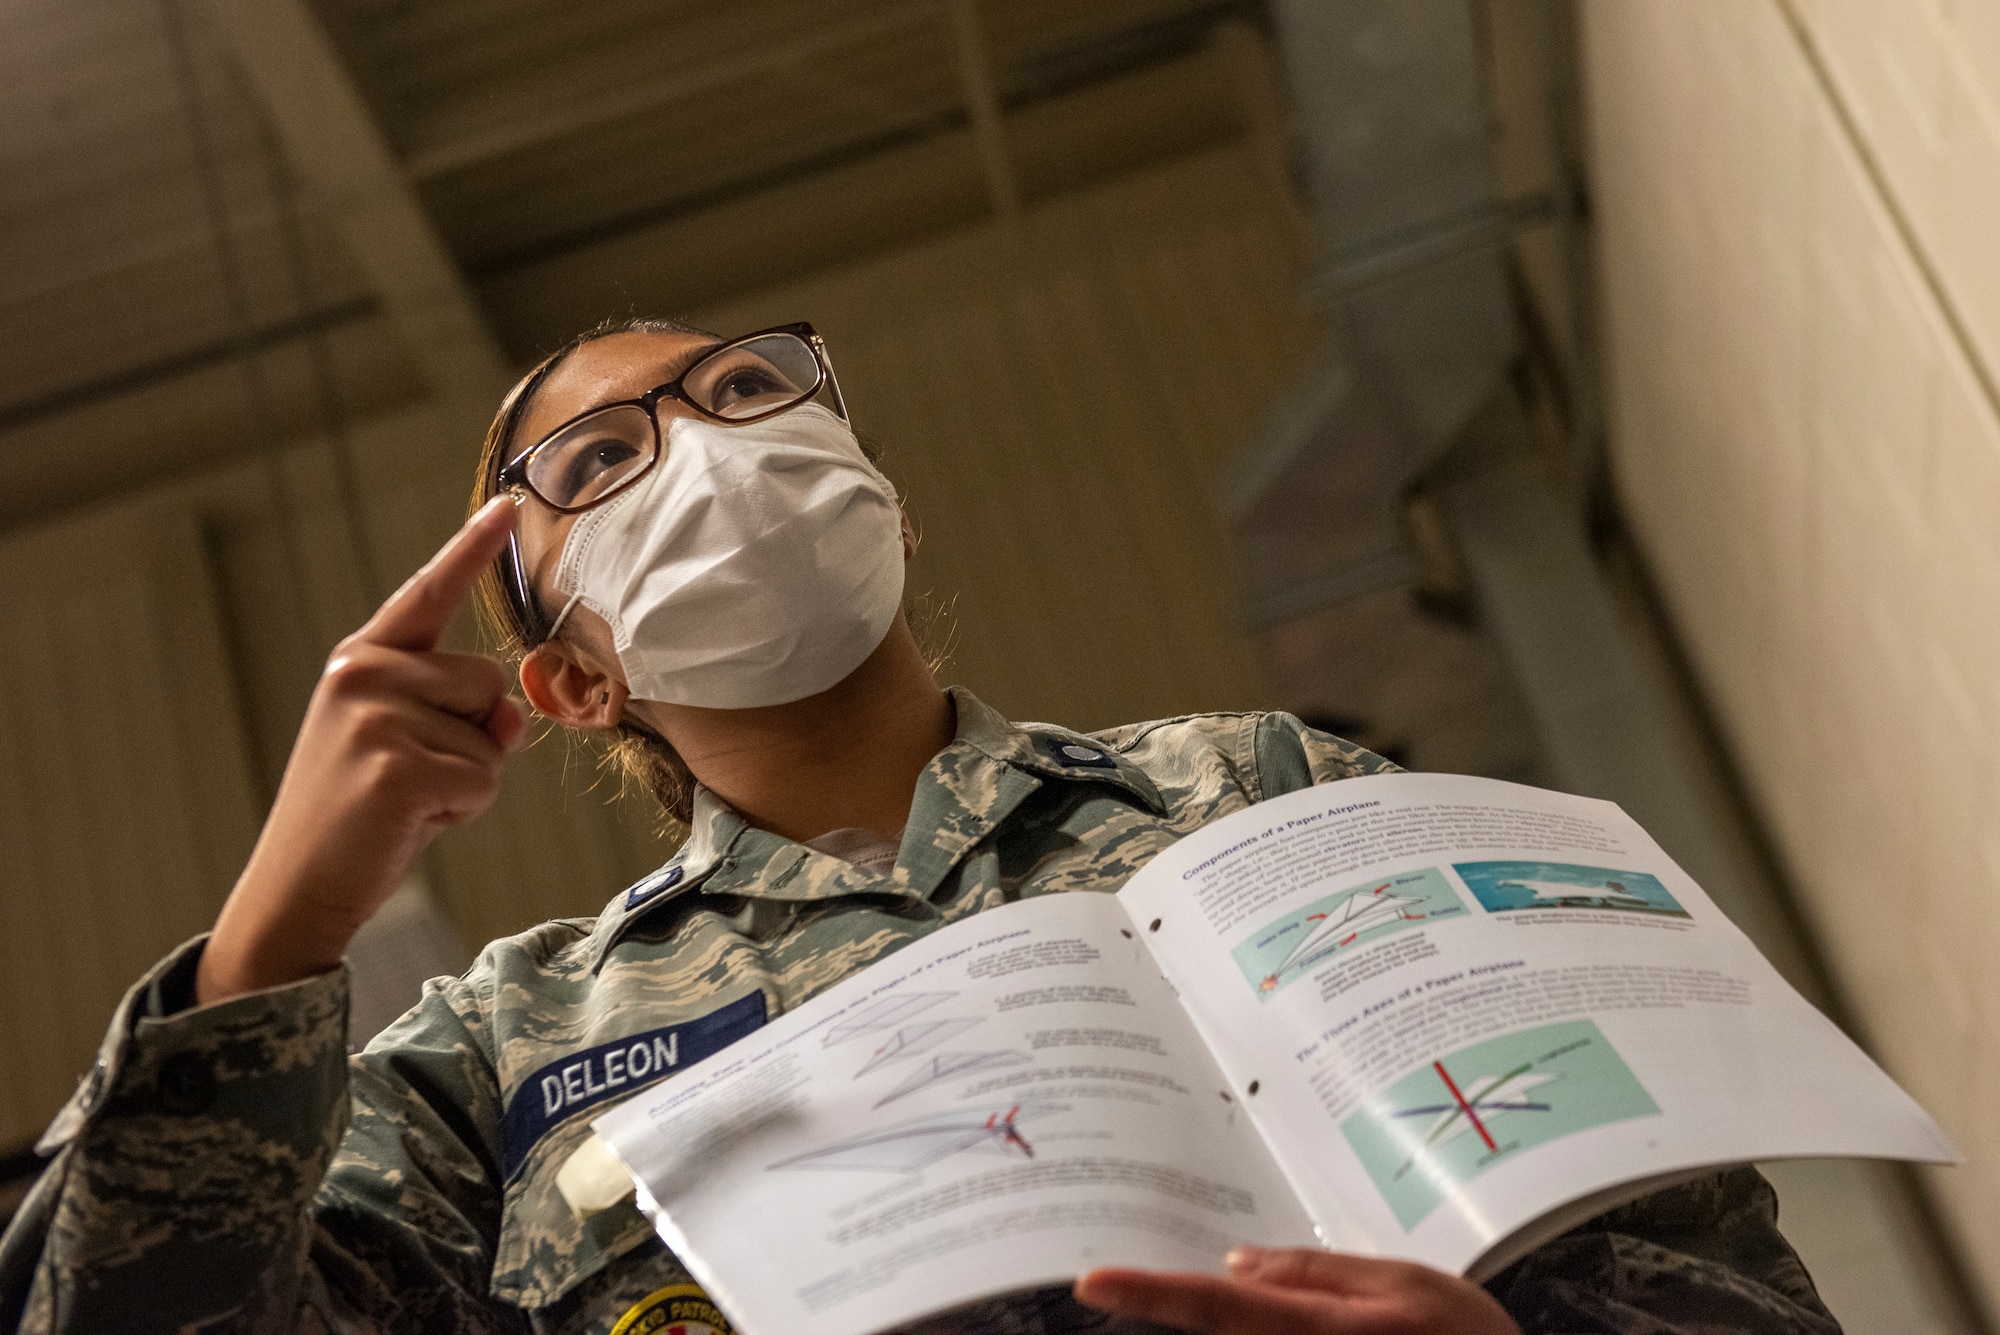 A member of Civil Air Patrol Unit 2801’s cadet training squadron, displays an example of the education materials the cadets study